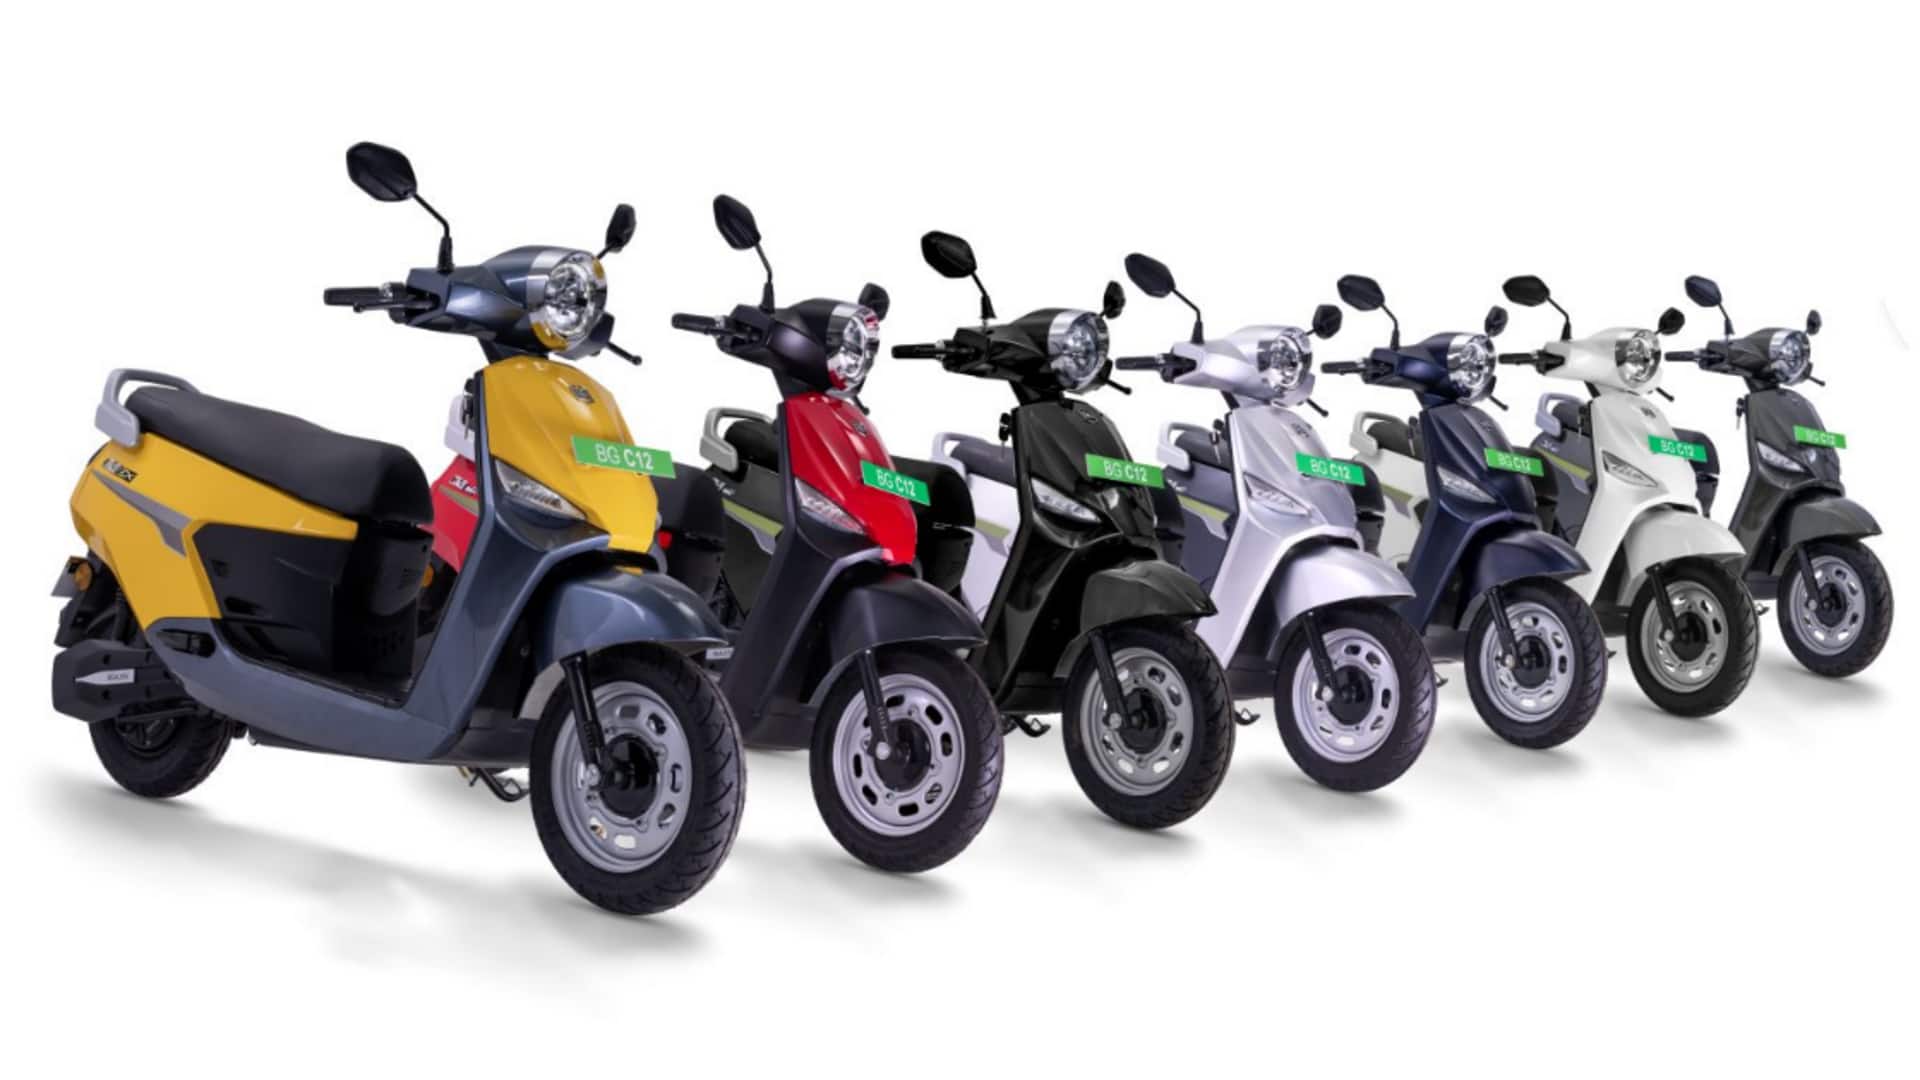 BGauss C12i EX e-scooter debuts in India at Rs. 1.0L